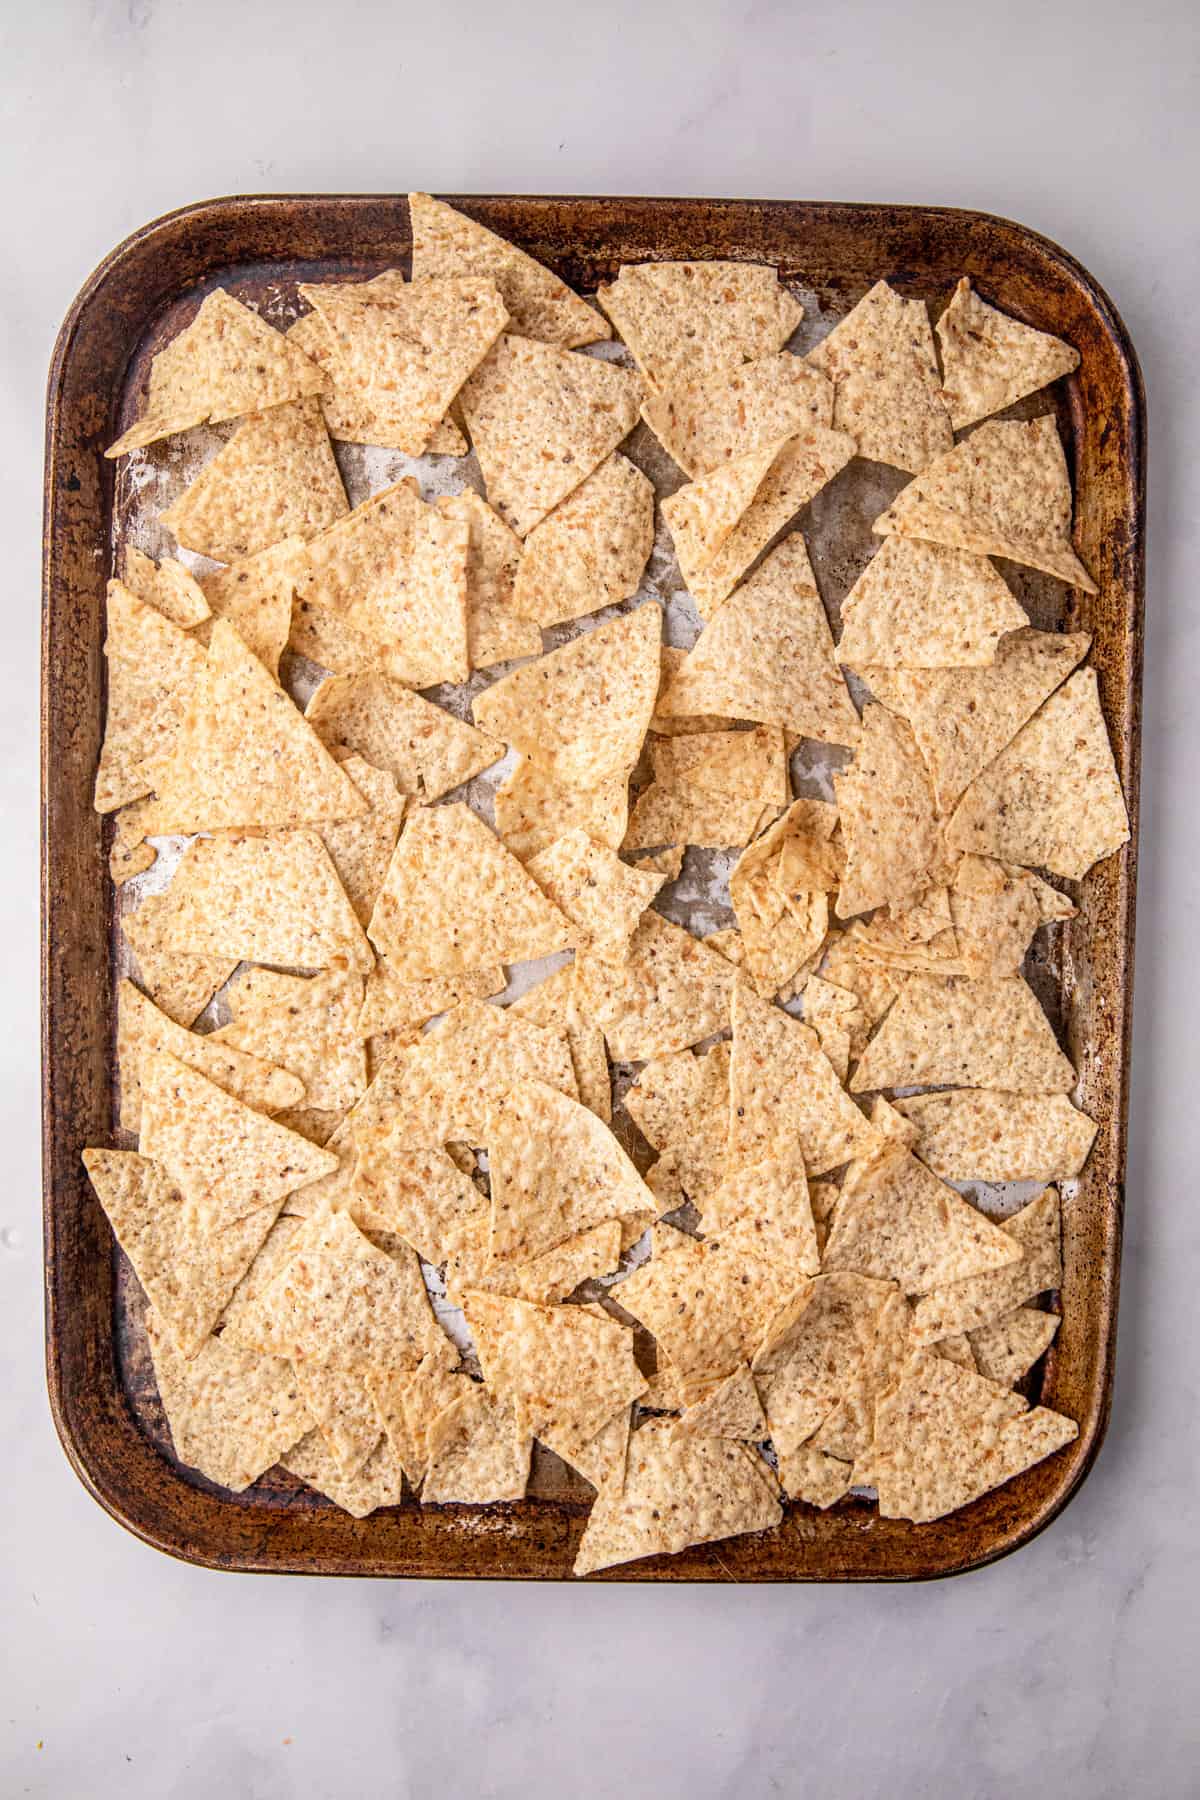 Lining cooking sheet with tortilla chips for Smoked Brisket Nachos recipe